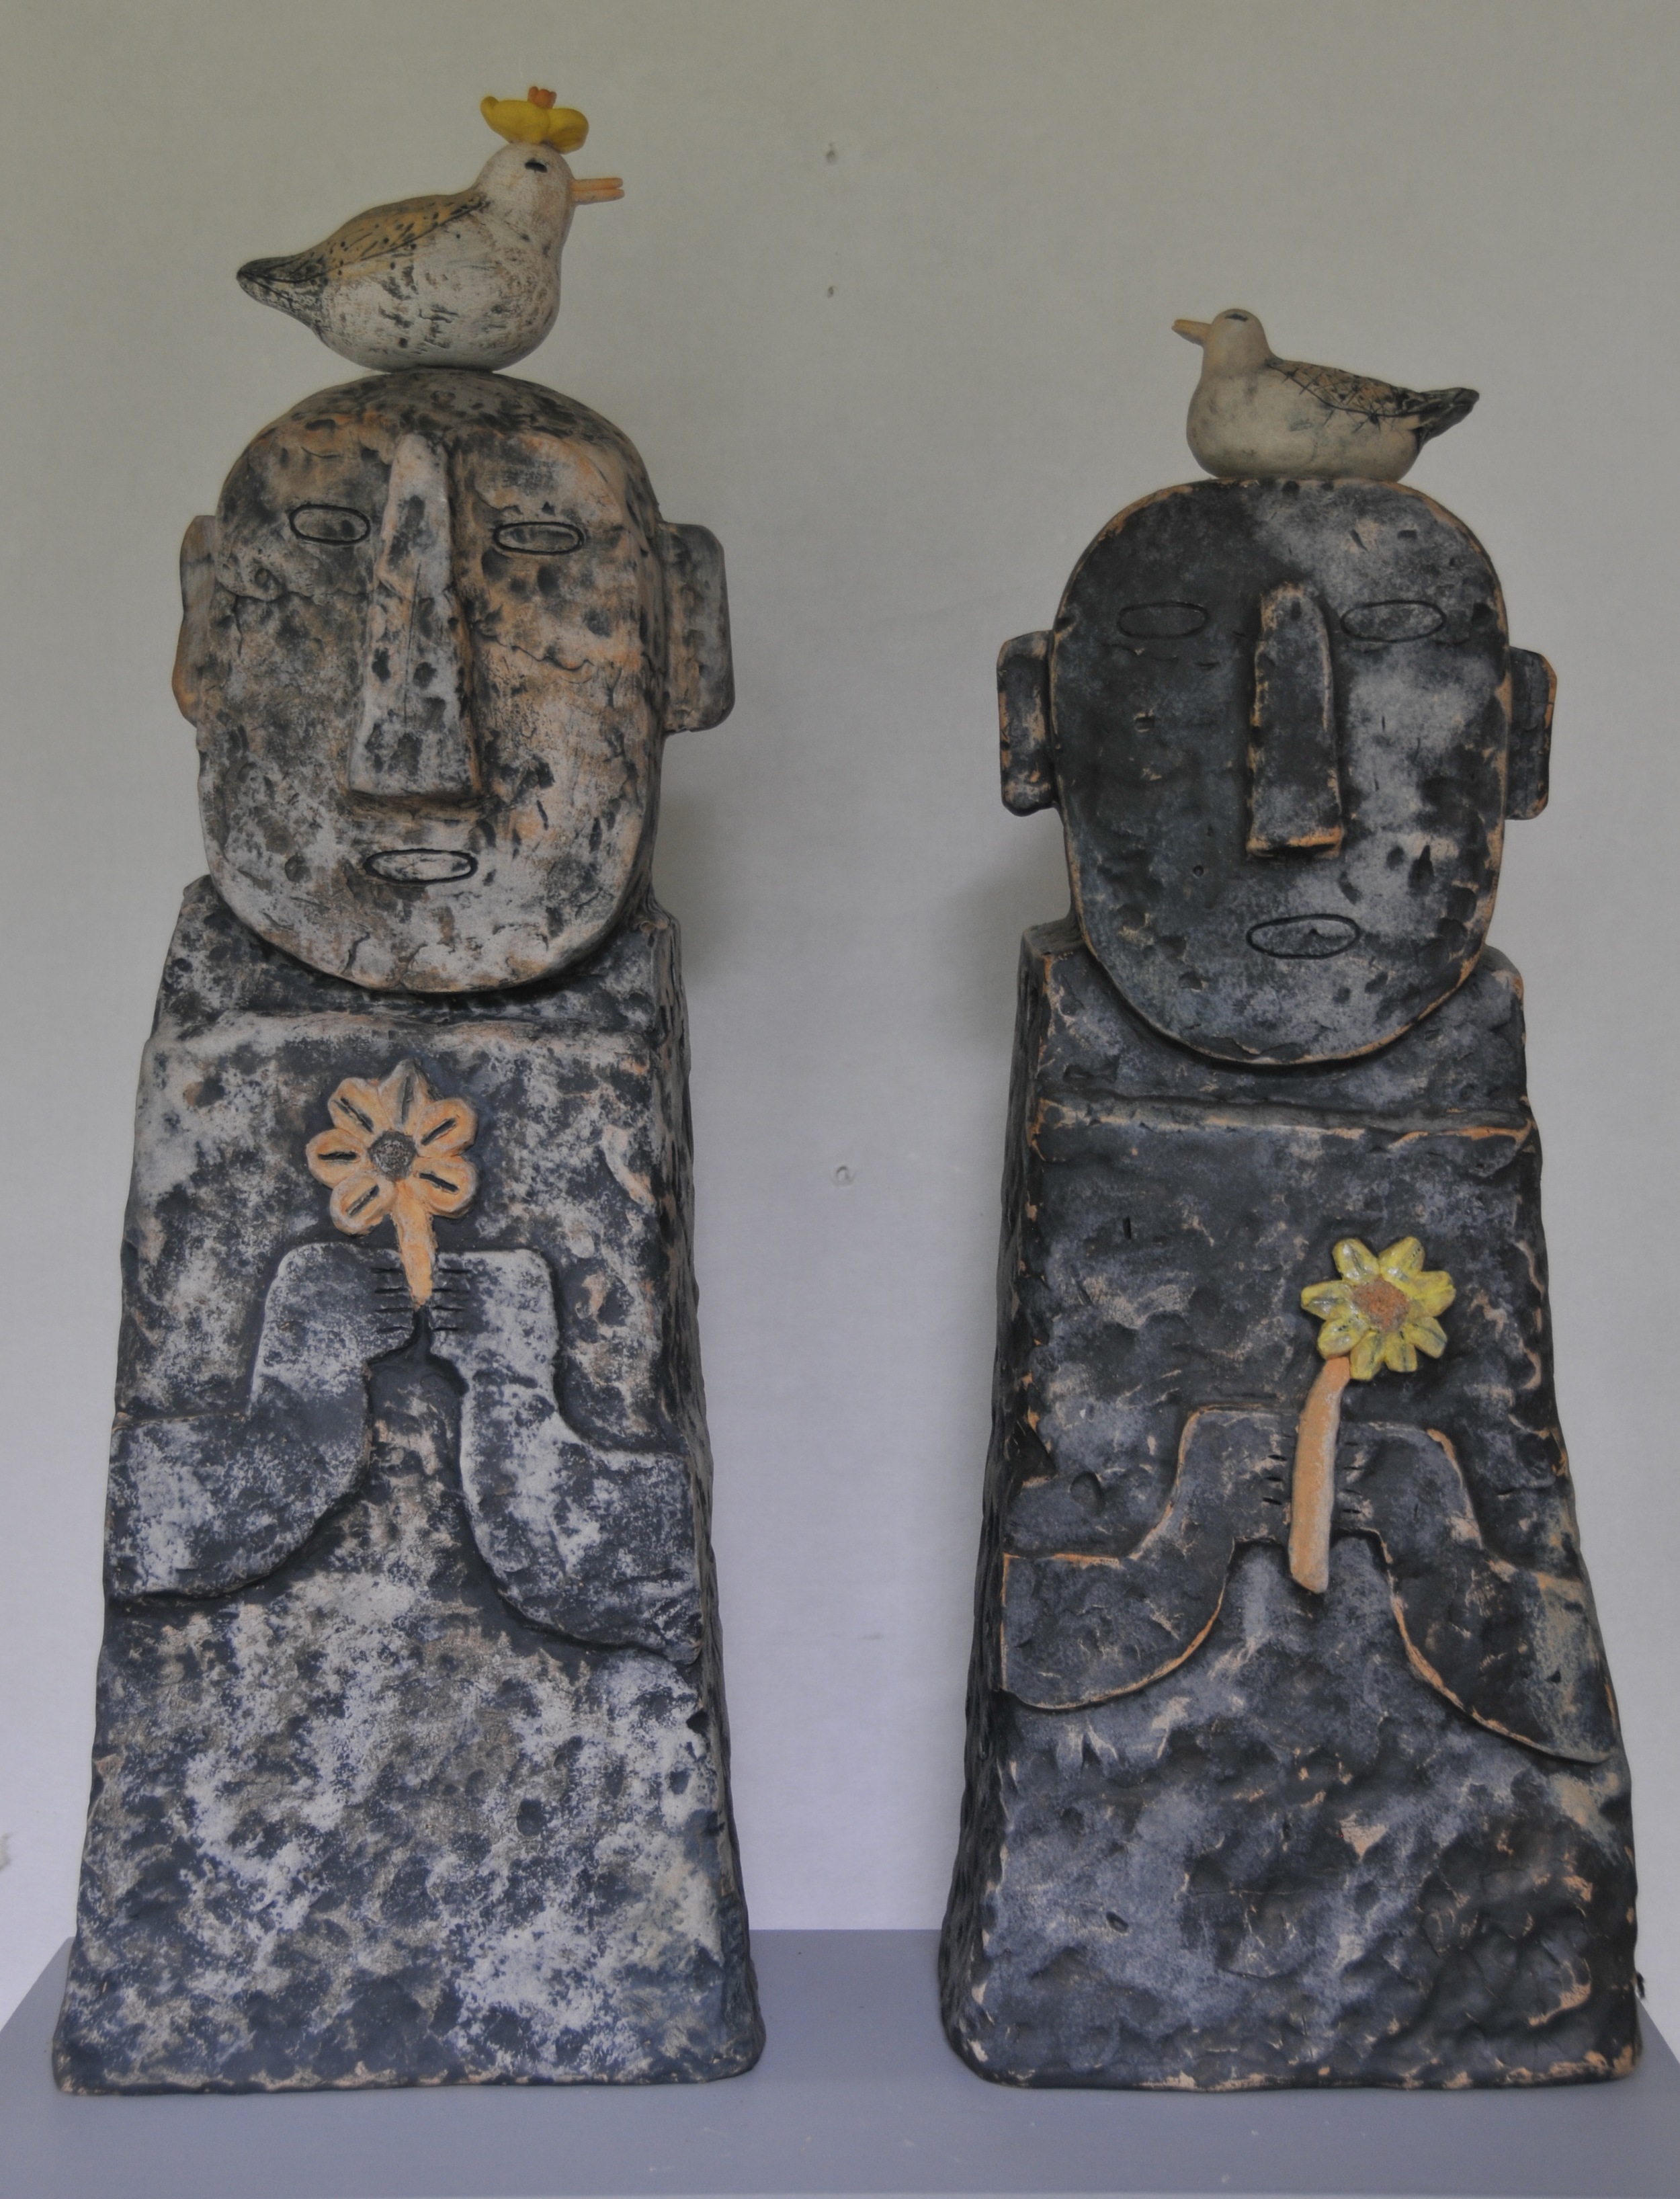  Jaeok Lee  Guardians of peace , Clay, 9.5"x8"x29" and 9.5"x6.5"x25" 